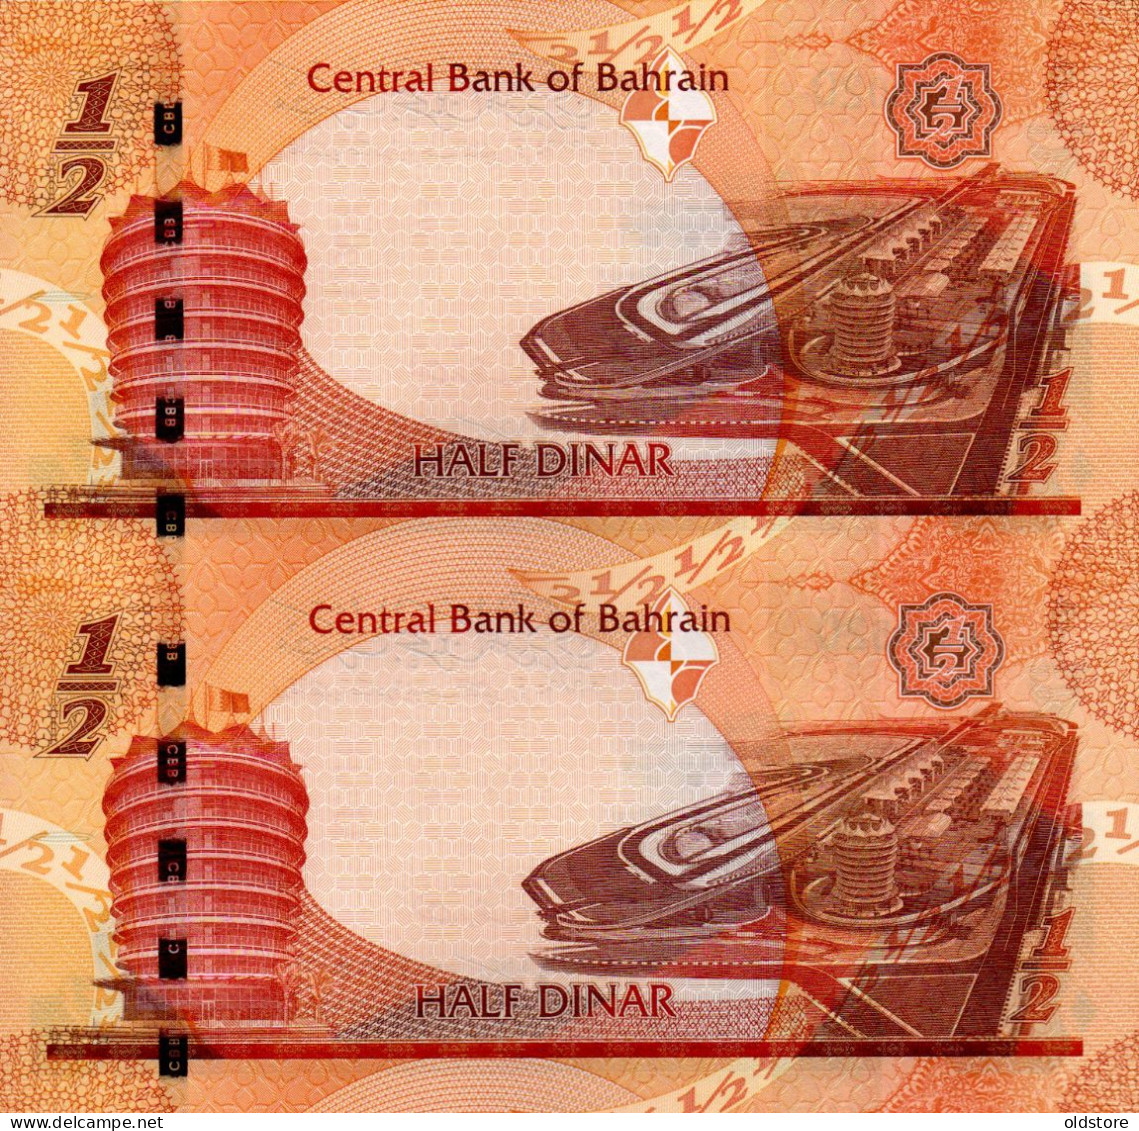 Bahrain - 1/2 Dinar - 2 Pieces Of Uncut Sheet - Issue 2008 New Signature - Similarity In The Last Two Numbers UNC Rare - Bahrain